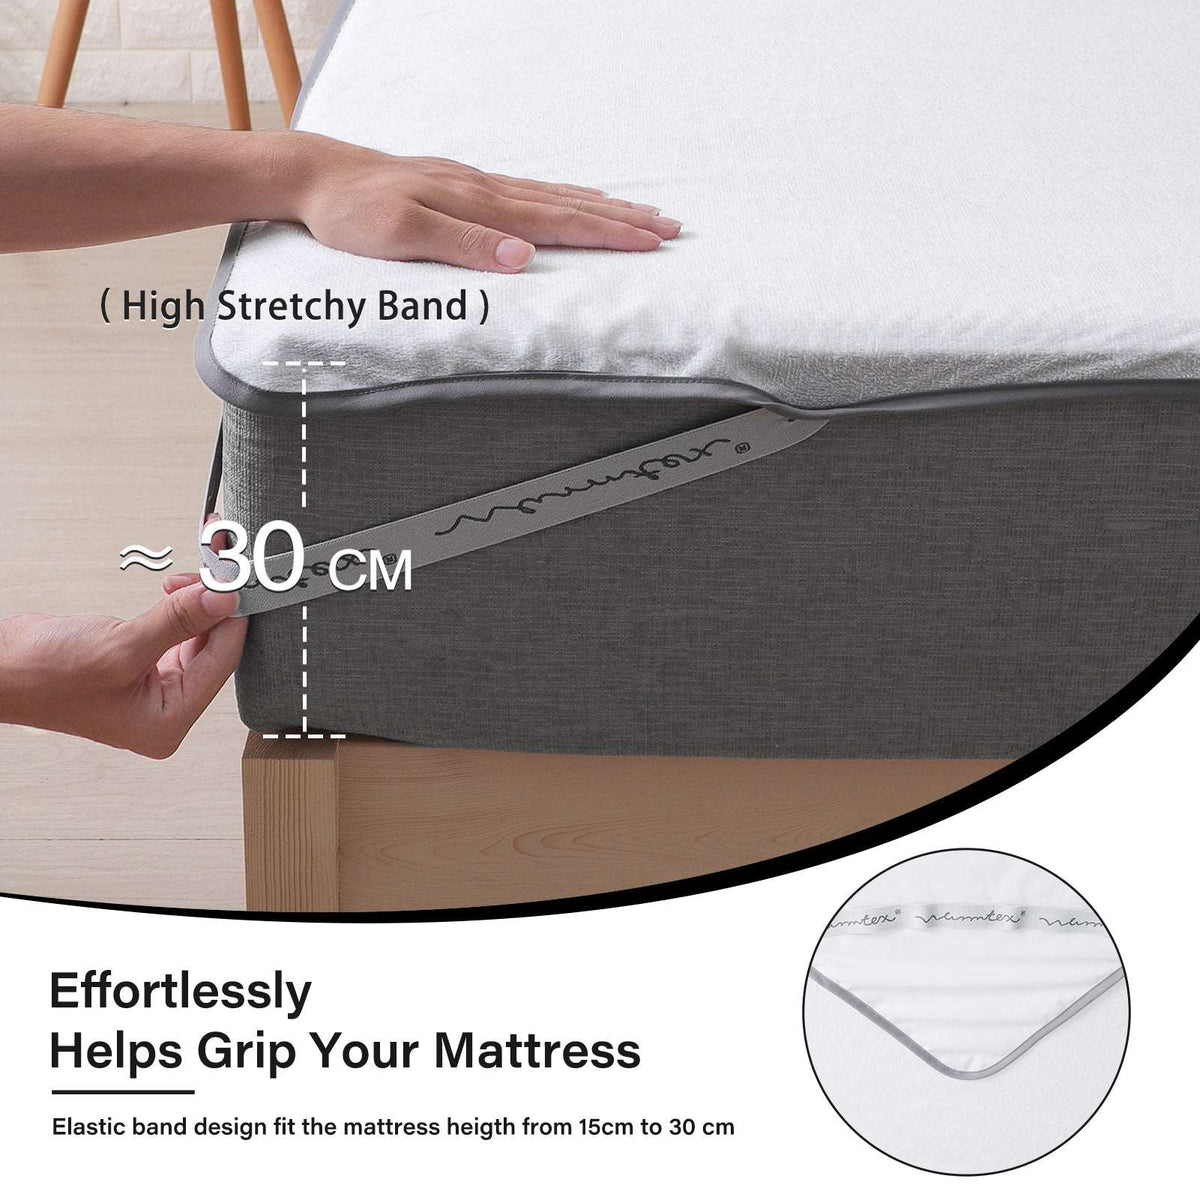 Mattress breathable waterproof cover protector with elastic bands in the 4 corners.